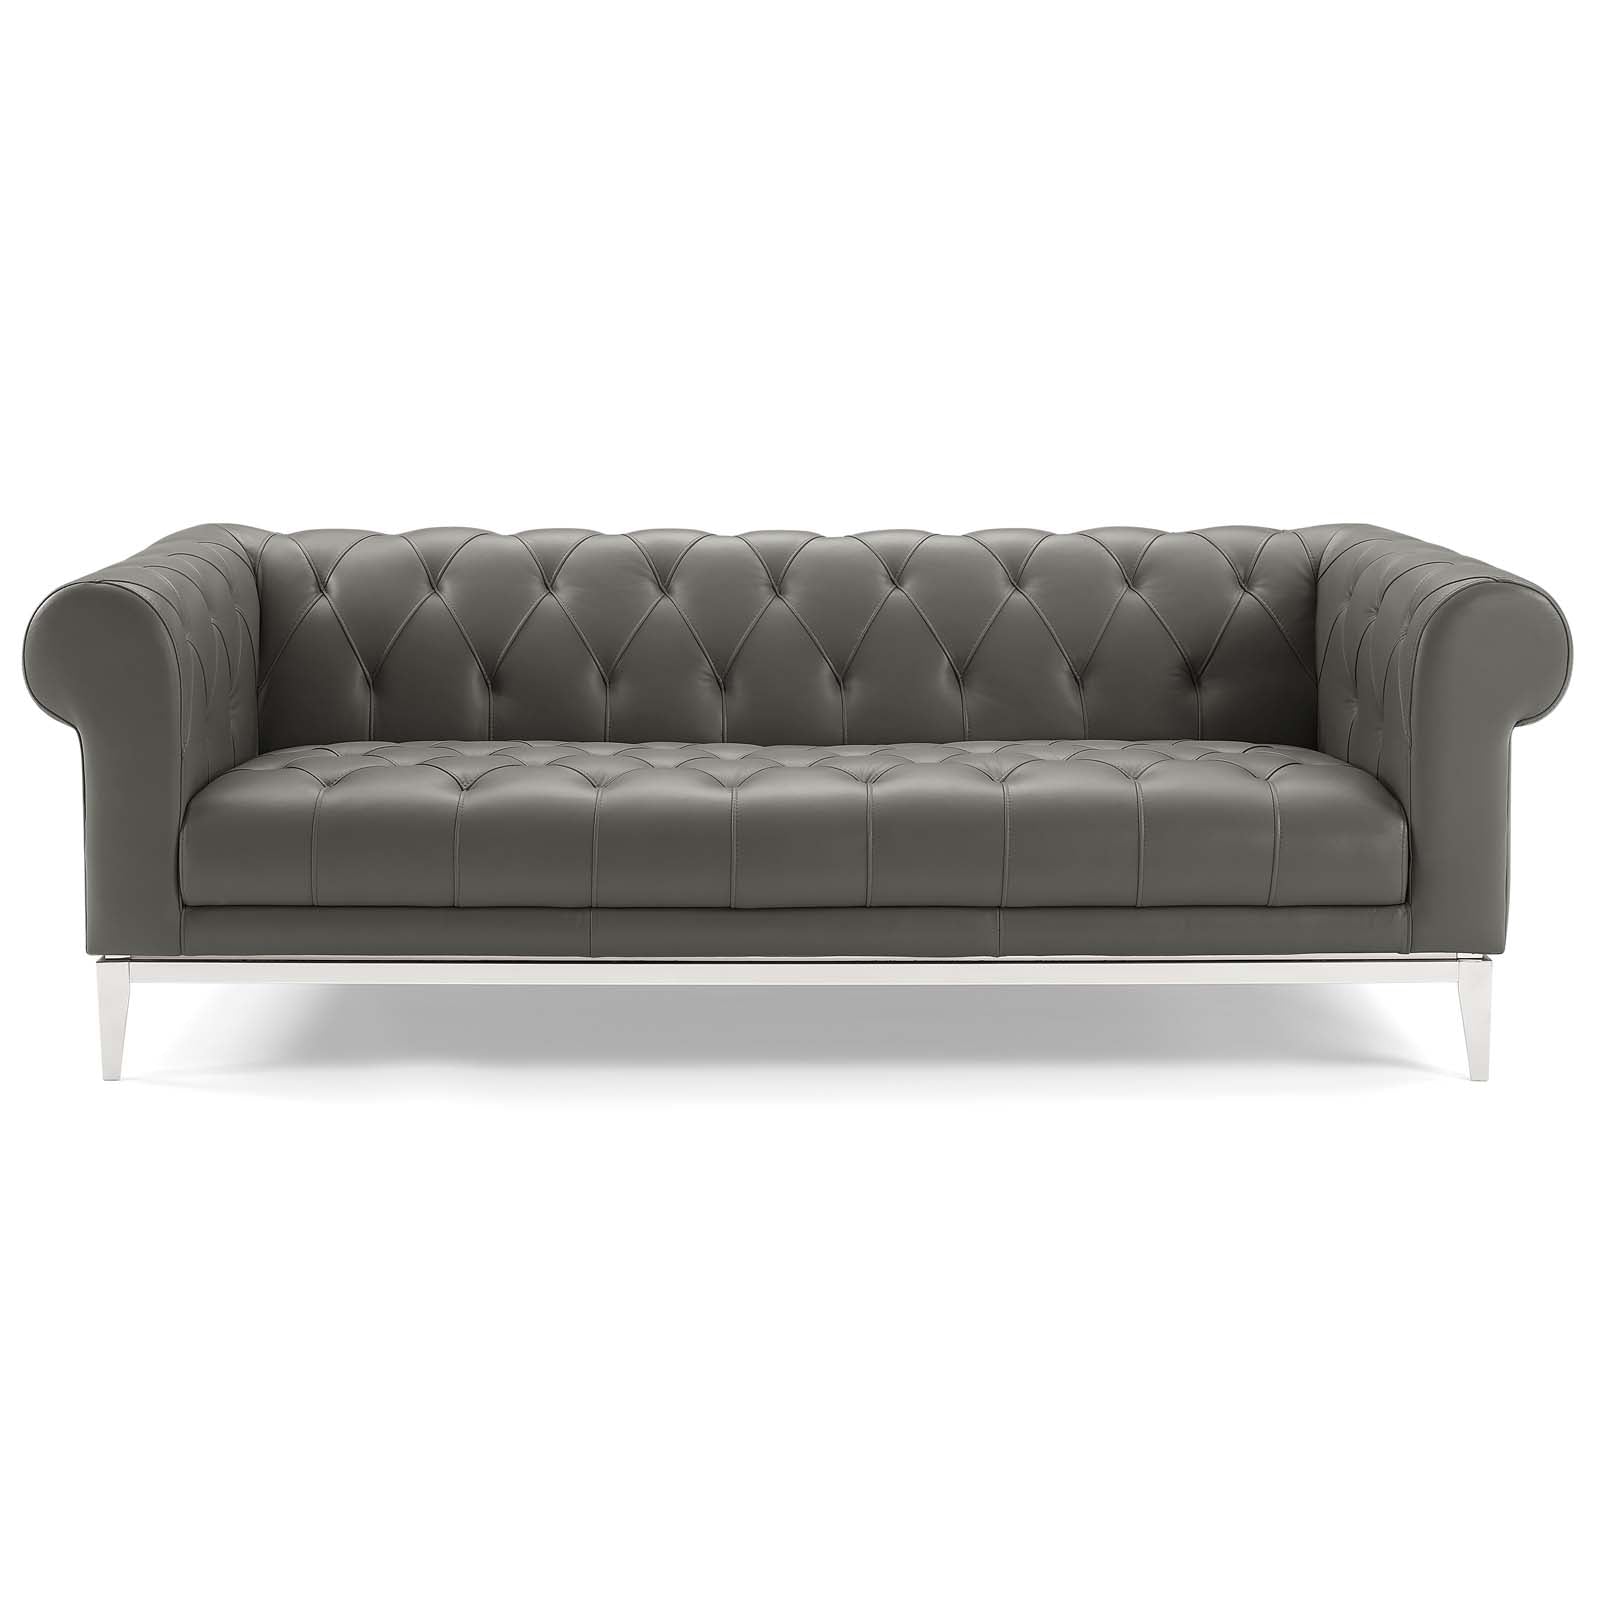 Idyll Tufted Button Upholstered Leather Chesterfield Sofa - East Shore Modern Home Furnishings